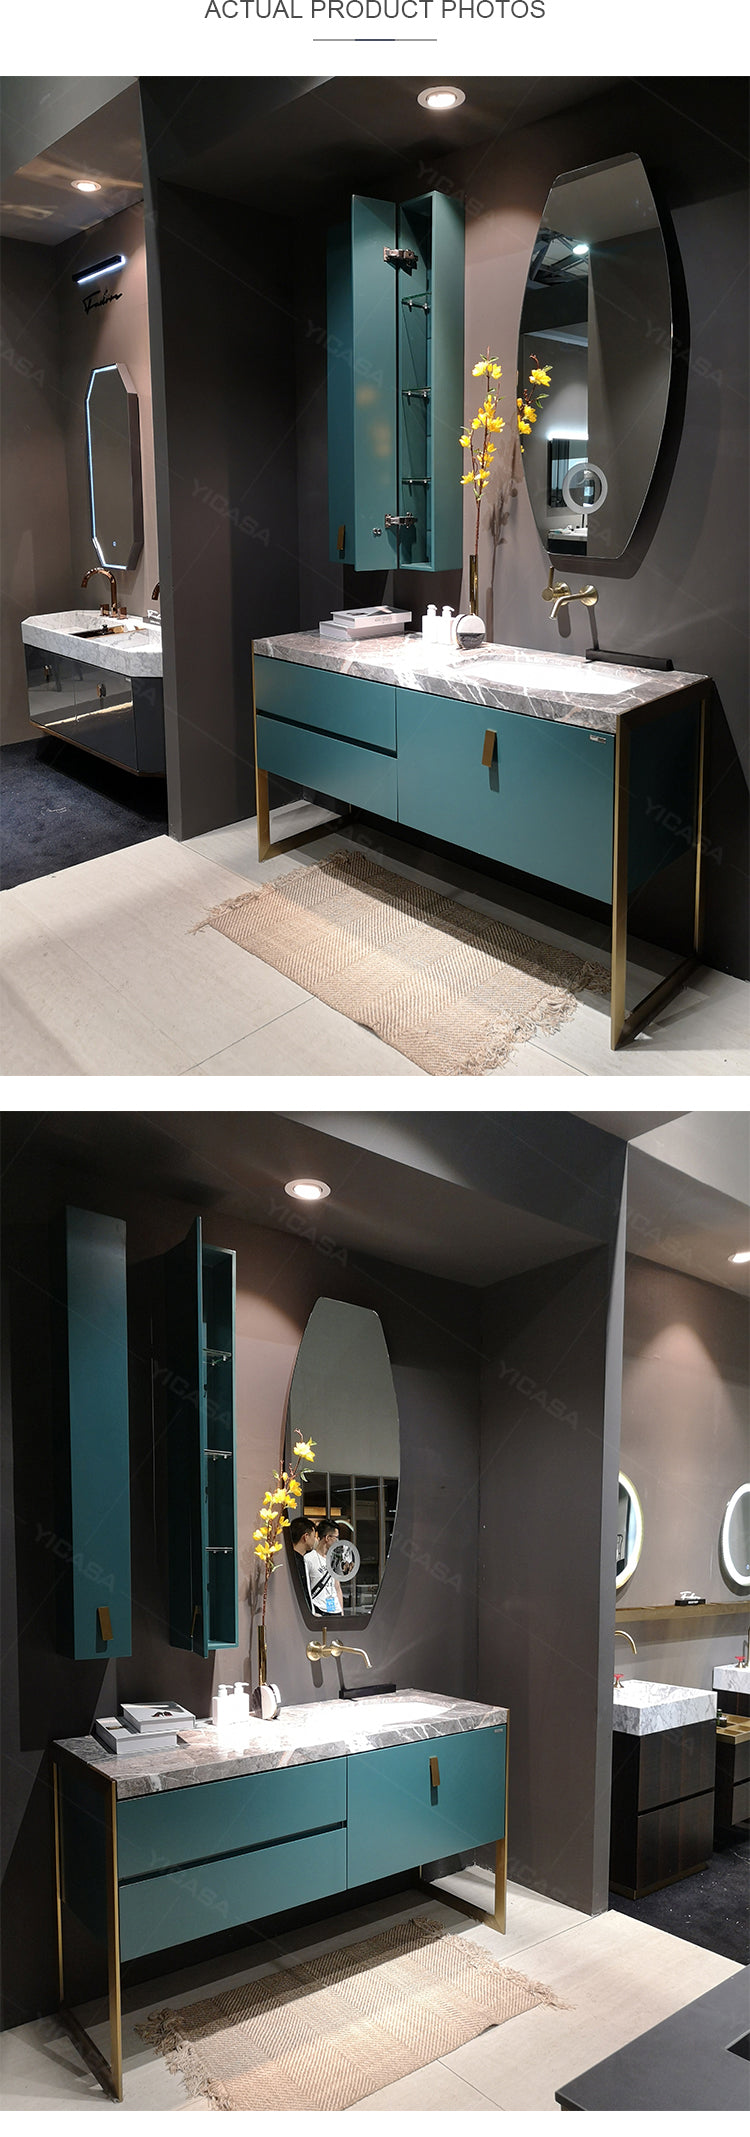 BISONI-Turquoise Green with brushed gold freestanding vanity 55" x 21"